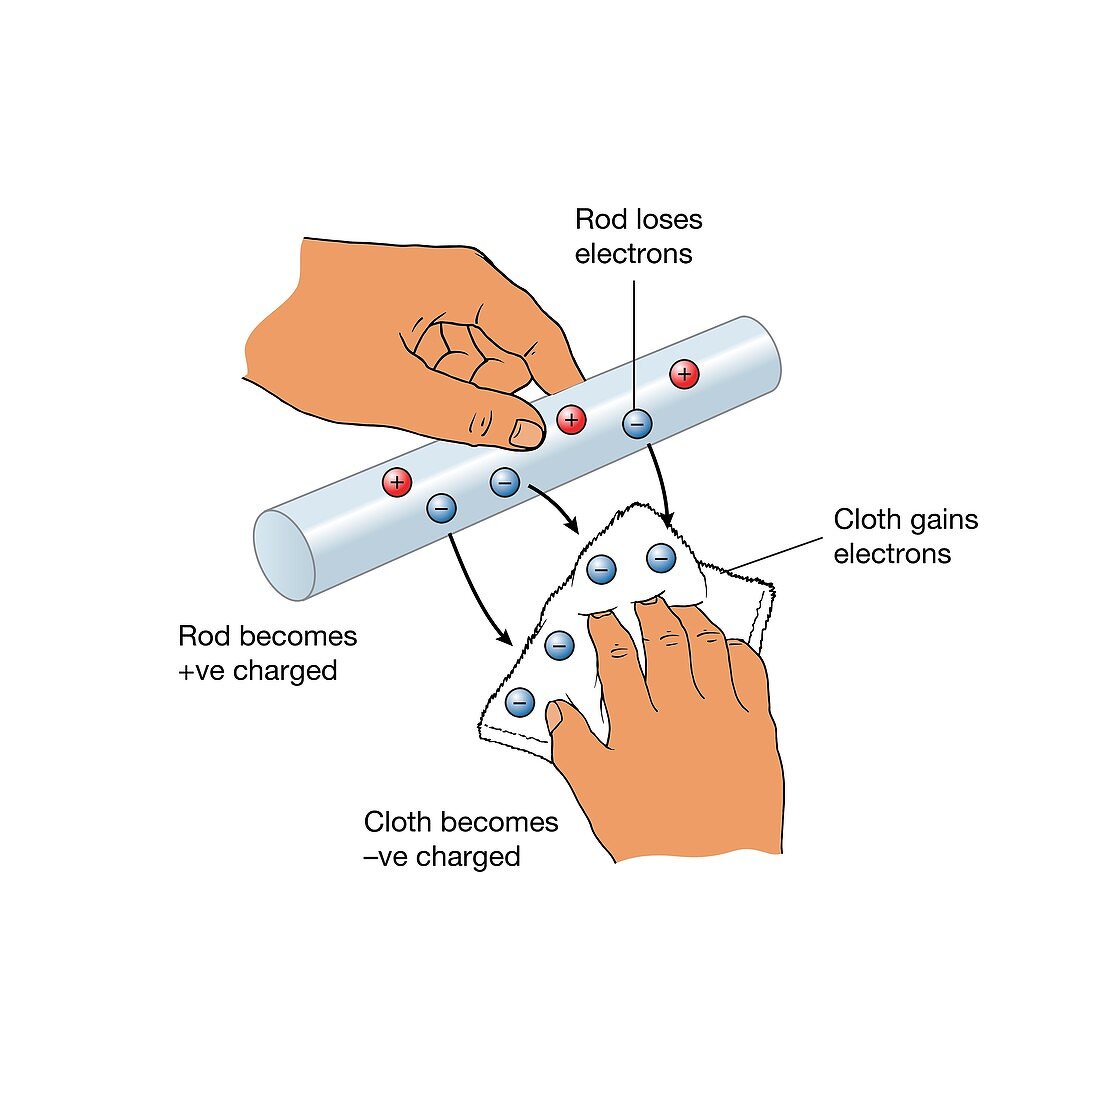 Static electricity on rubbing rod with cloth, illustration